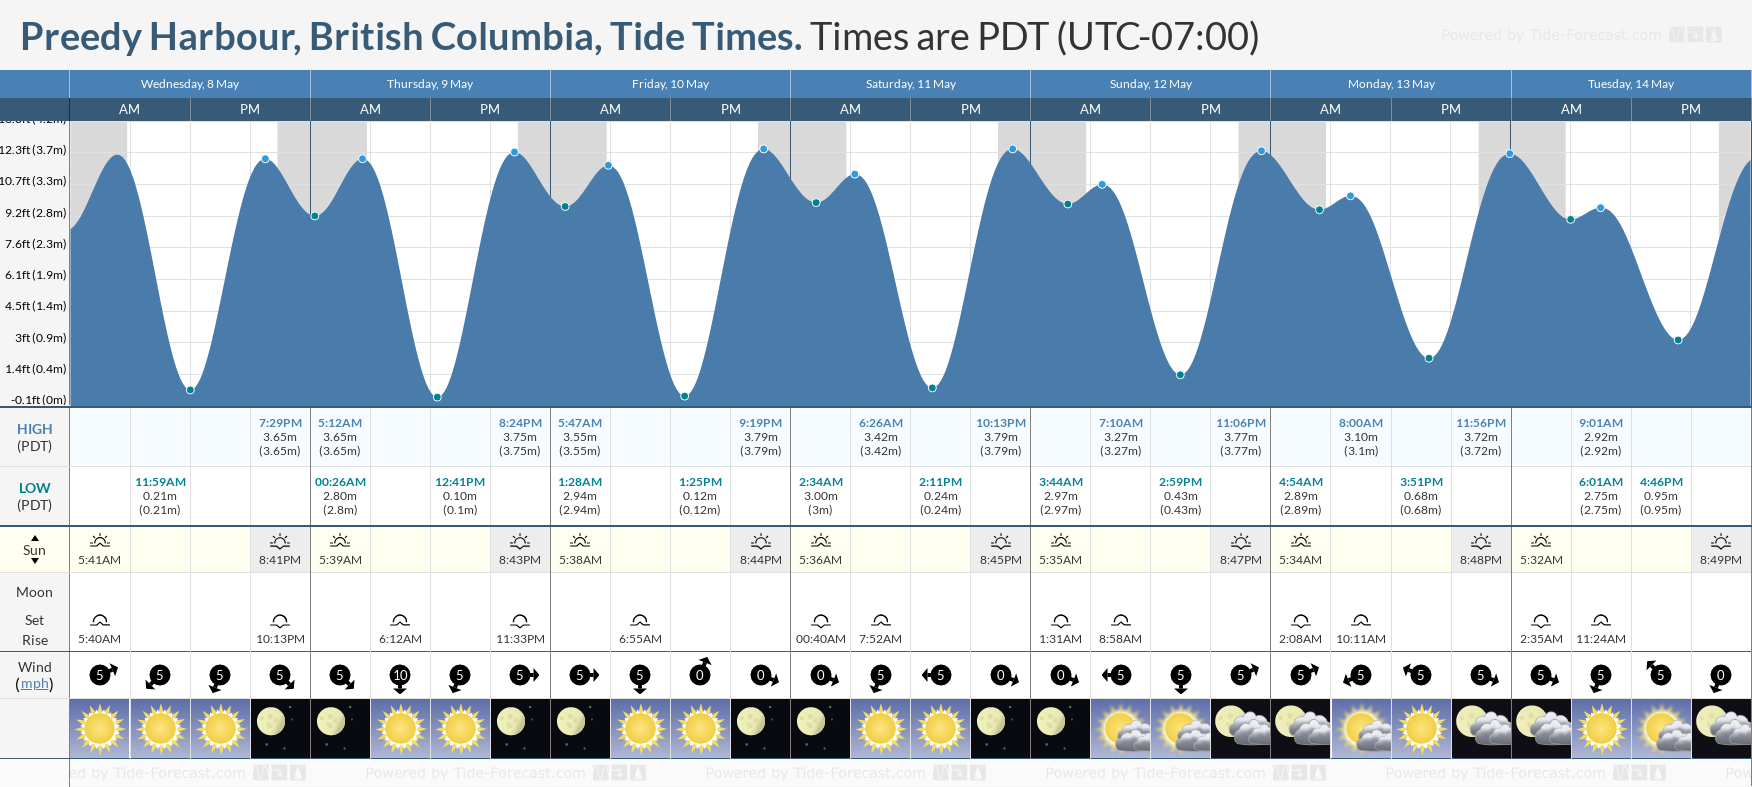 Preedy Harbour, British Columbia Tide Chart including high and low tide tide times for the next 7 days